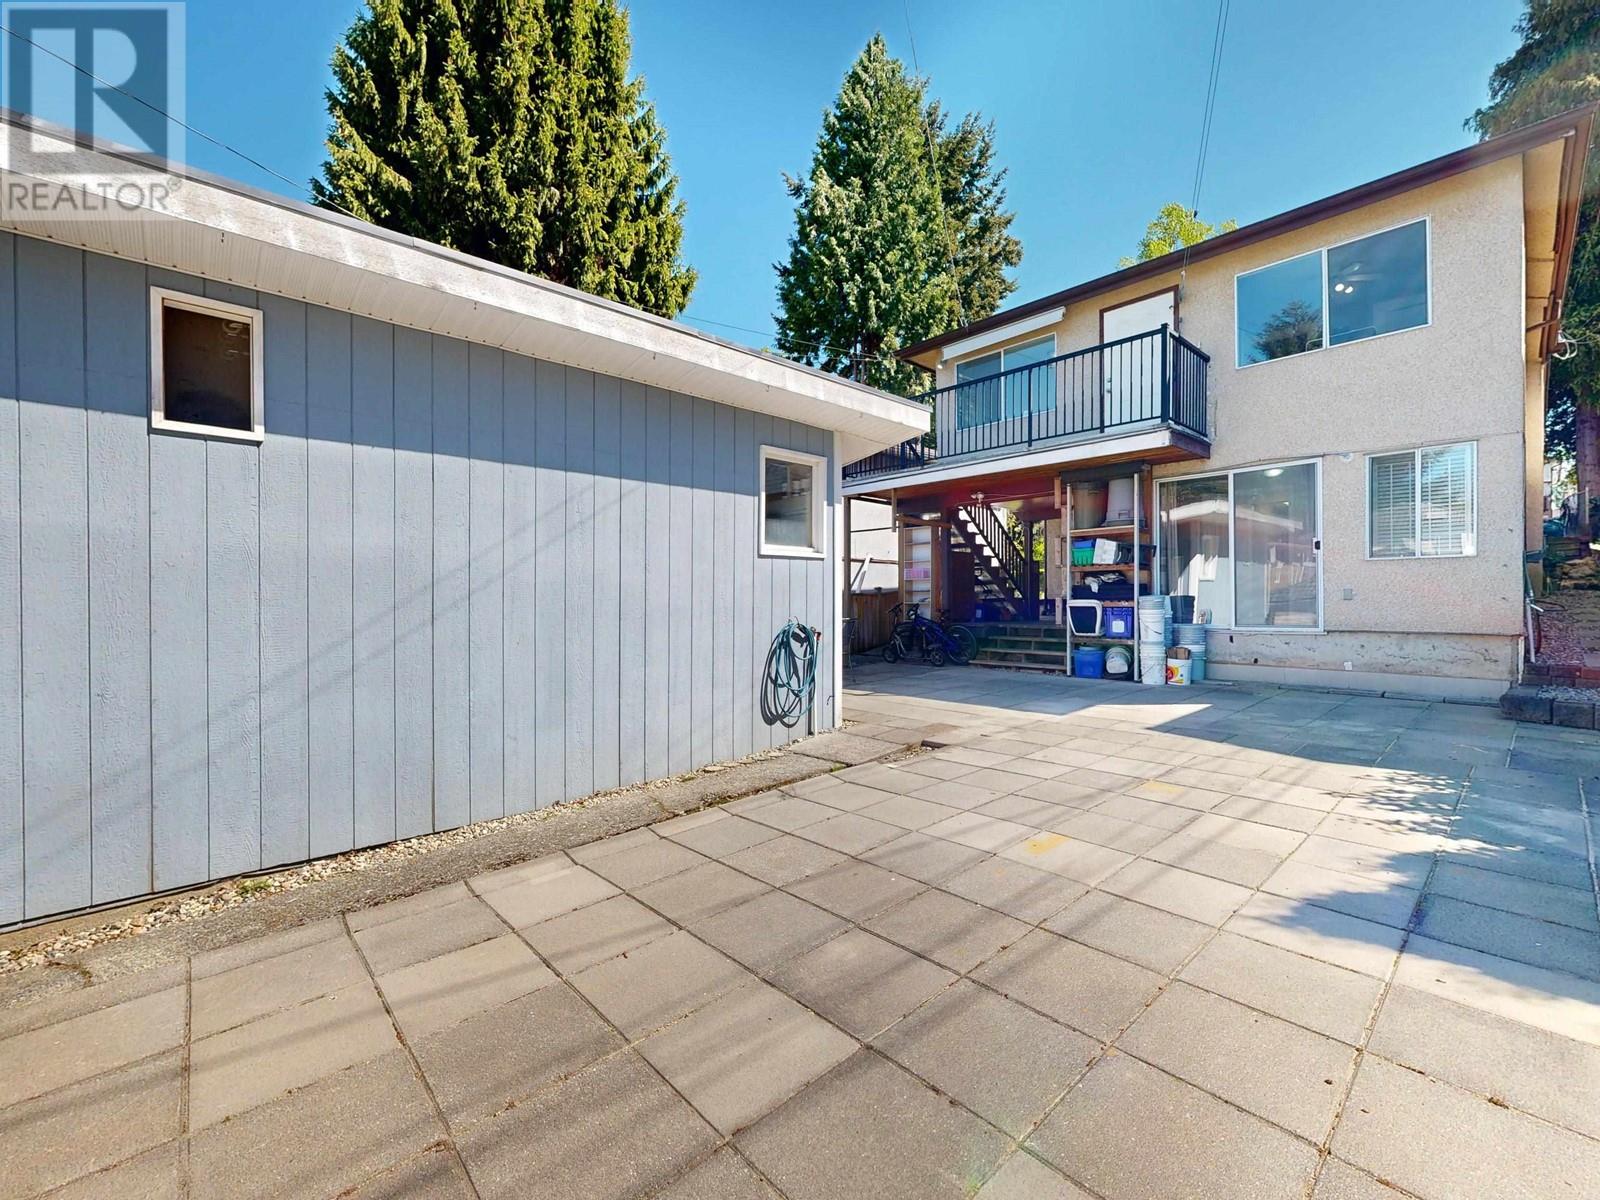 Listing Picture 27 of 35 : 5543 DUNDEE STREET, Vancouver / 溫哥華 - 魯藝地產 Yvonne Lu Group - MLS Medallion Club Member